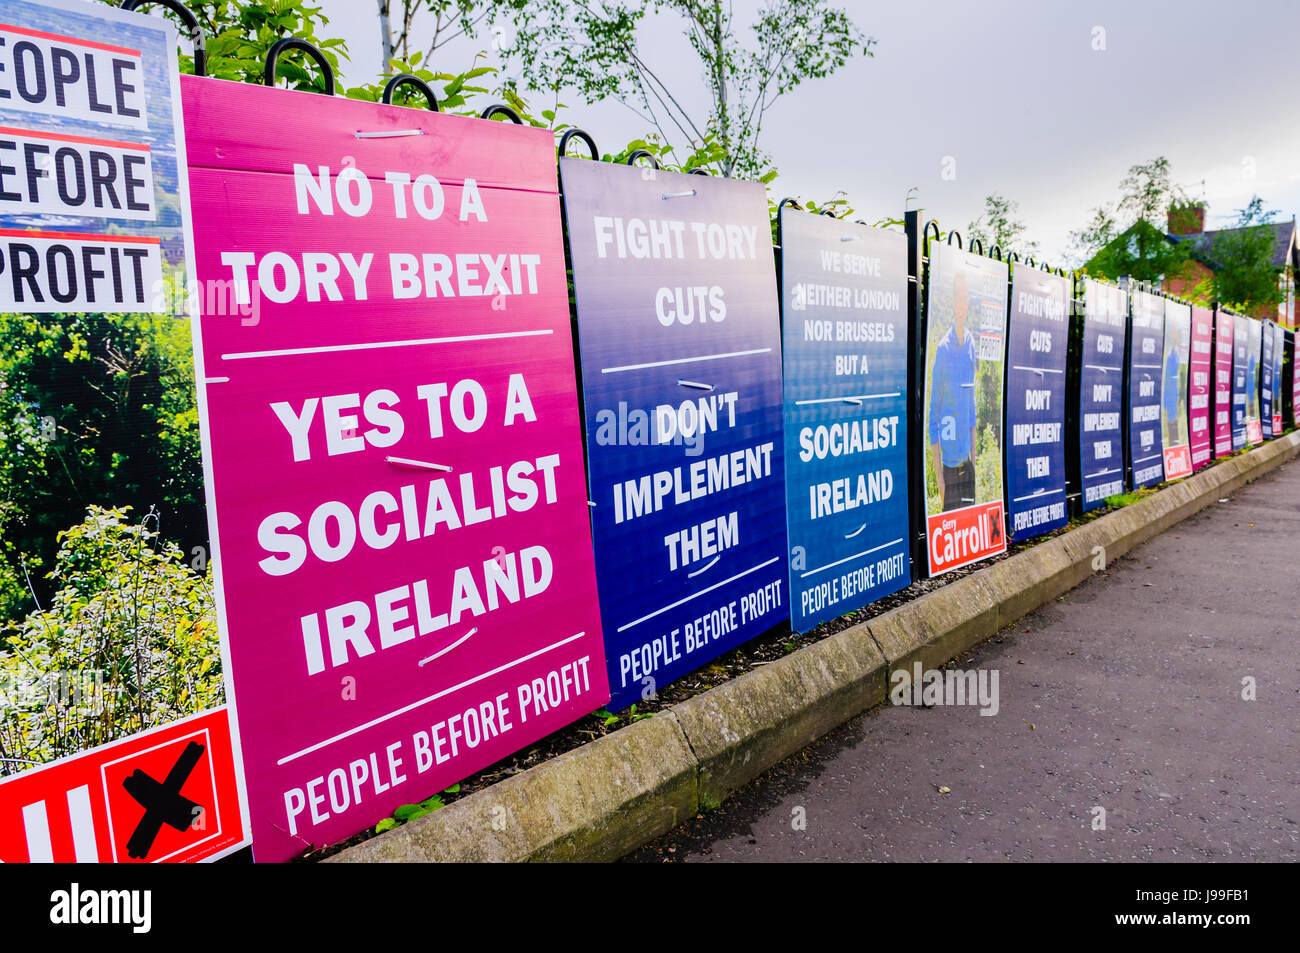 Election posters belonging to People Before Profit calling for a Socialist Ireland and to say 'No to Tory Brexit' and 'Fight Tory Cuts.  Don't impleme Stock Photo